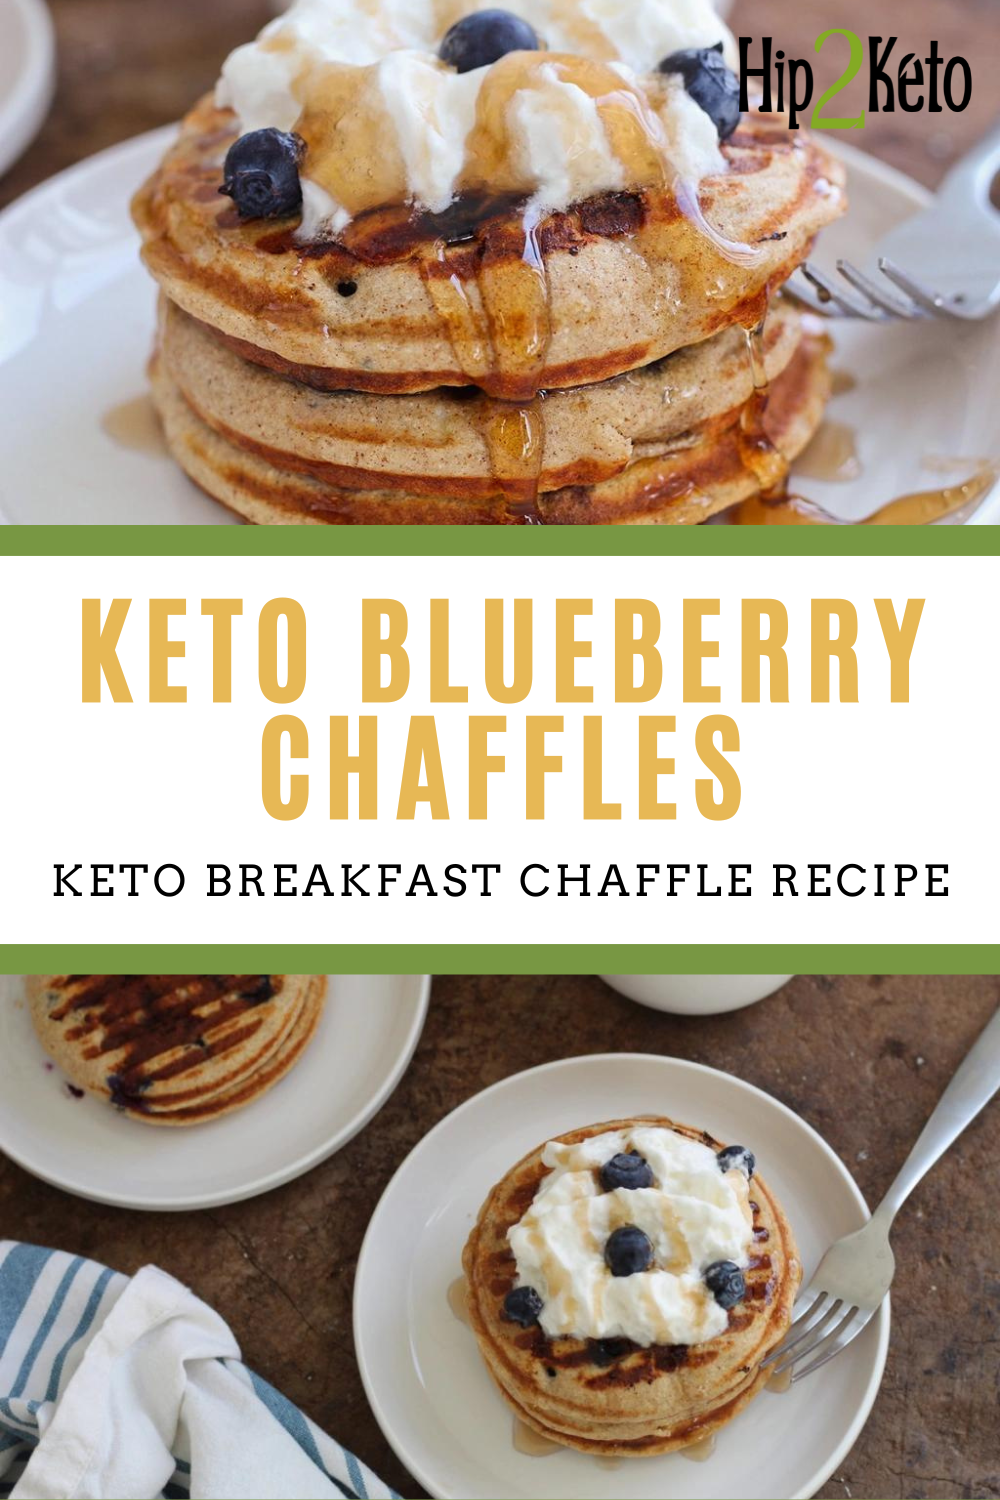 Blueberry Chaffle - The Best Keto Recipes